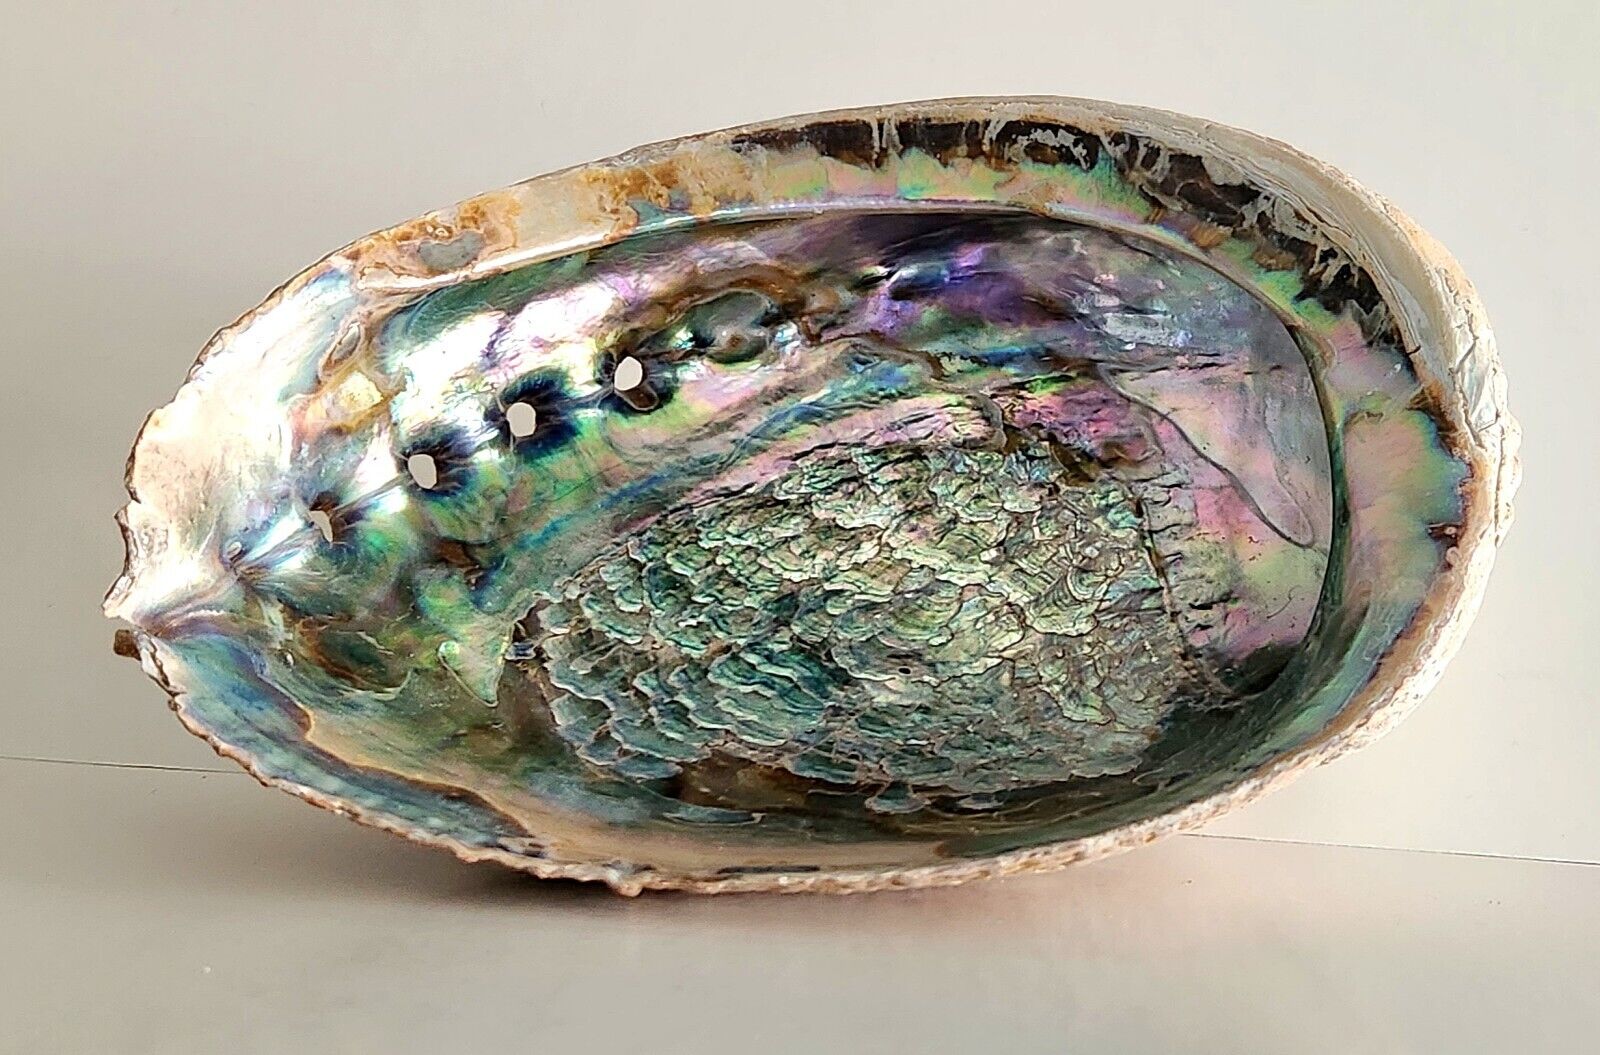 Vintage ABALONE SHELL Large Colorful 6 1/4 x 5 inches